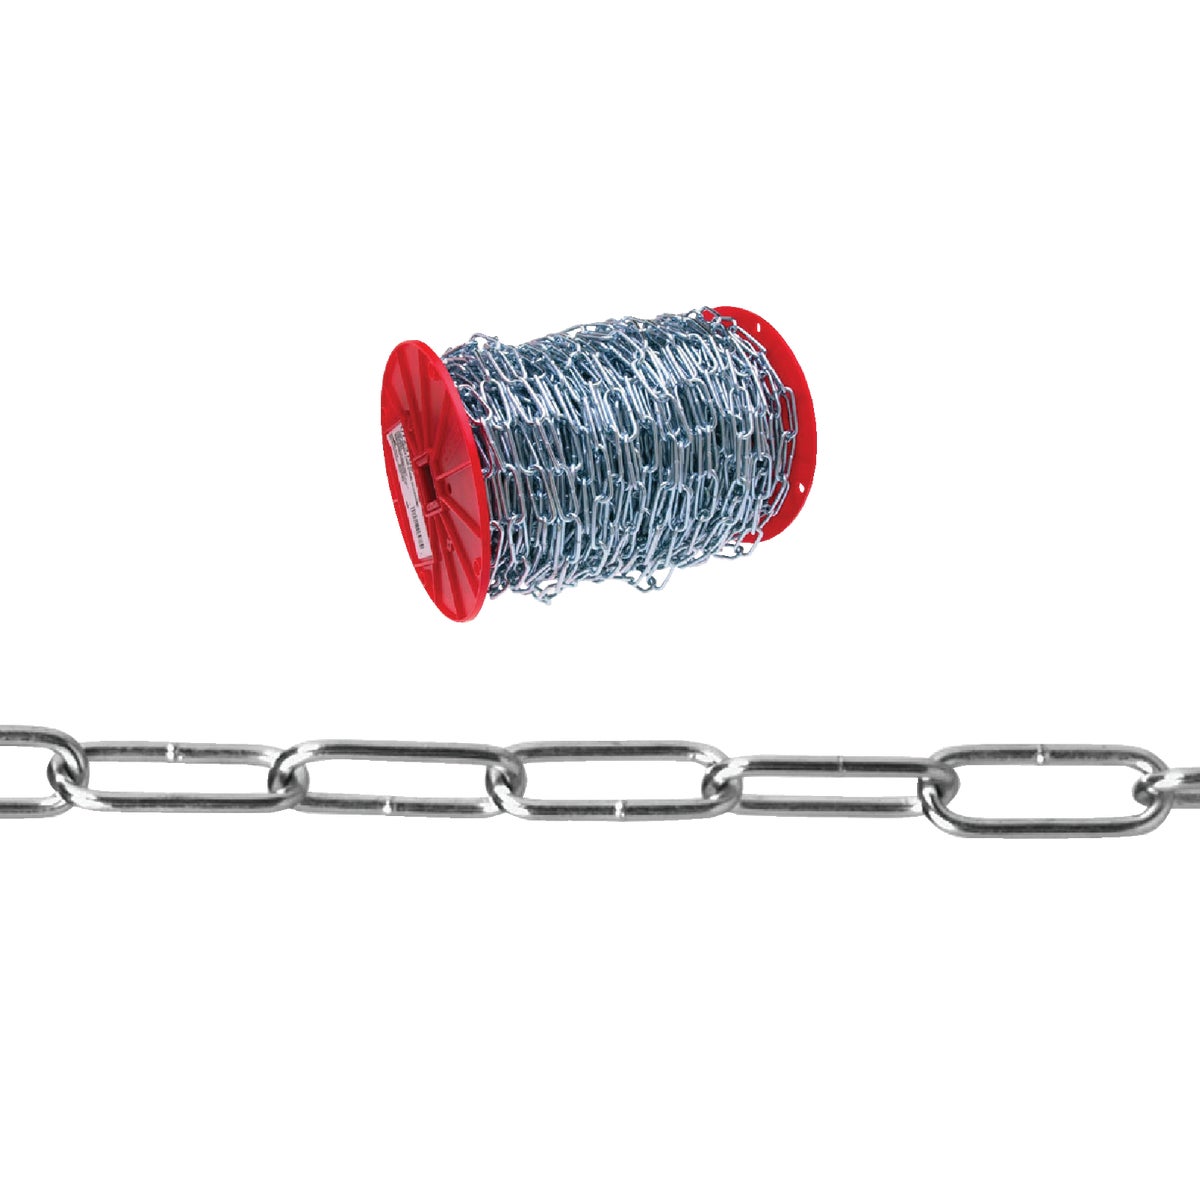 Item 769894, Handy link chain ideal for hanging fixtures and plants, animal ties, and 